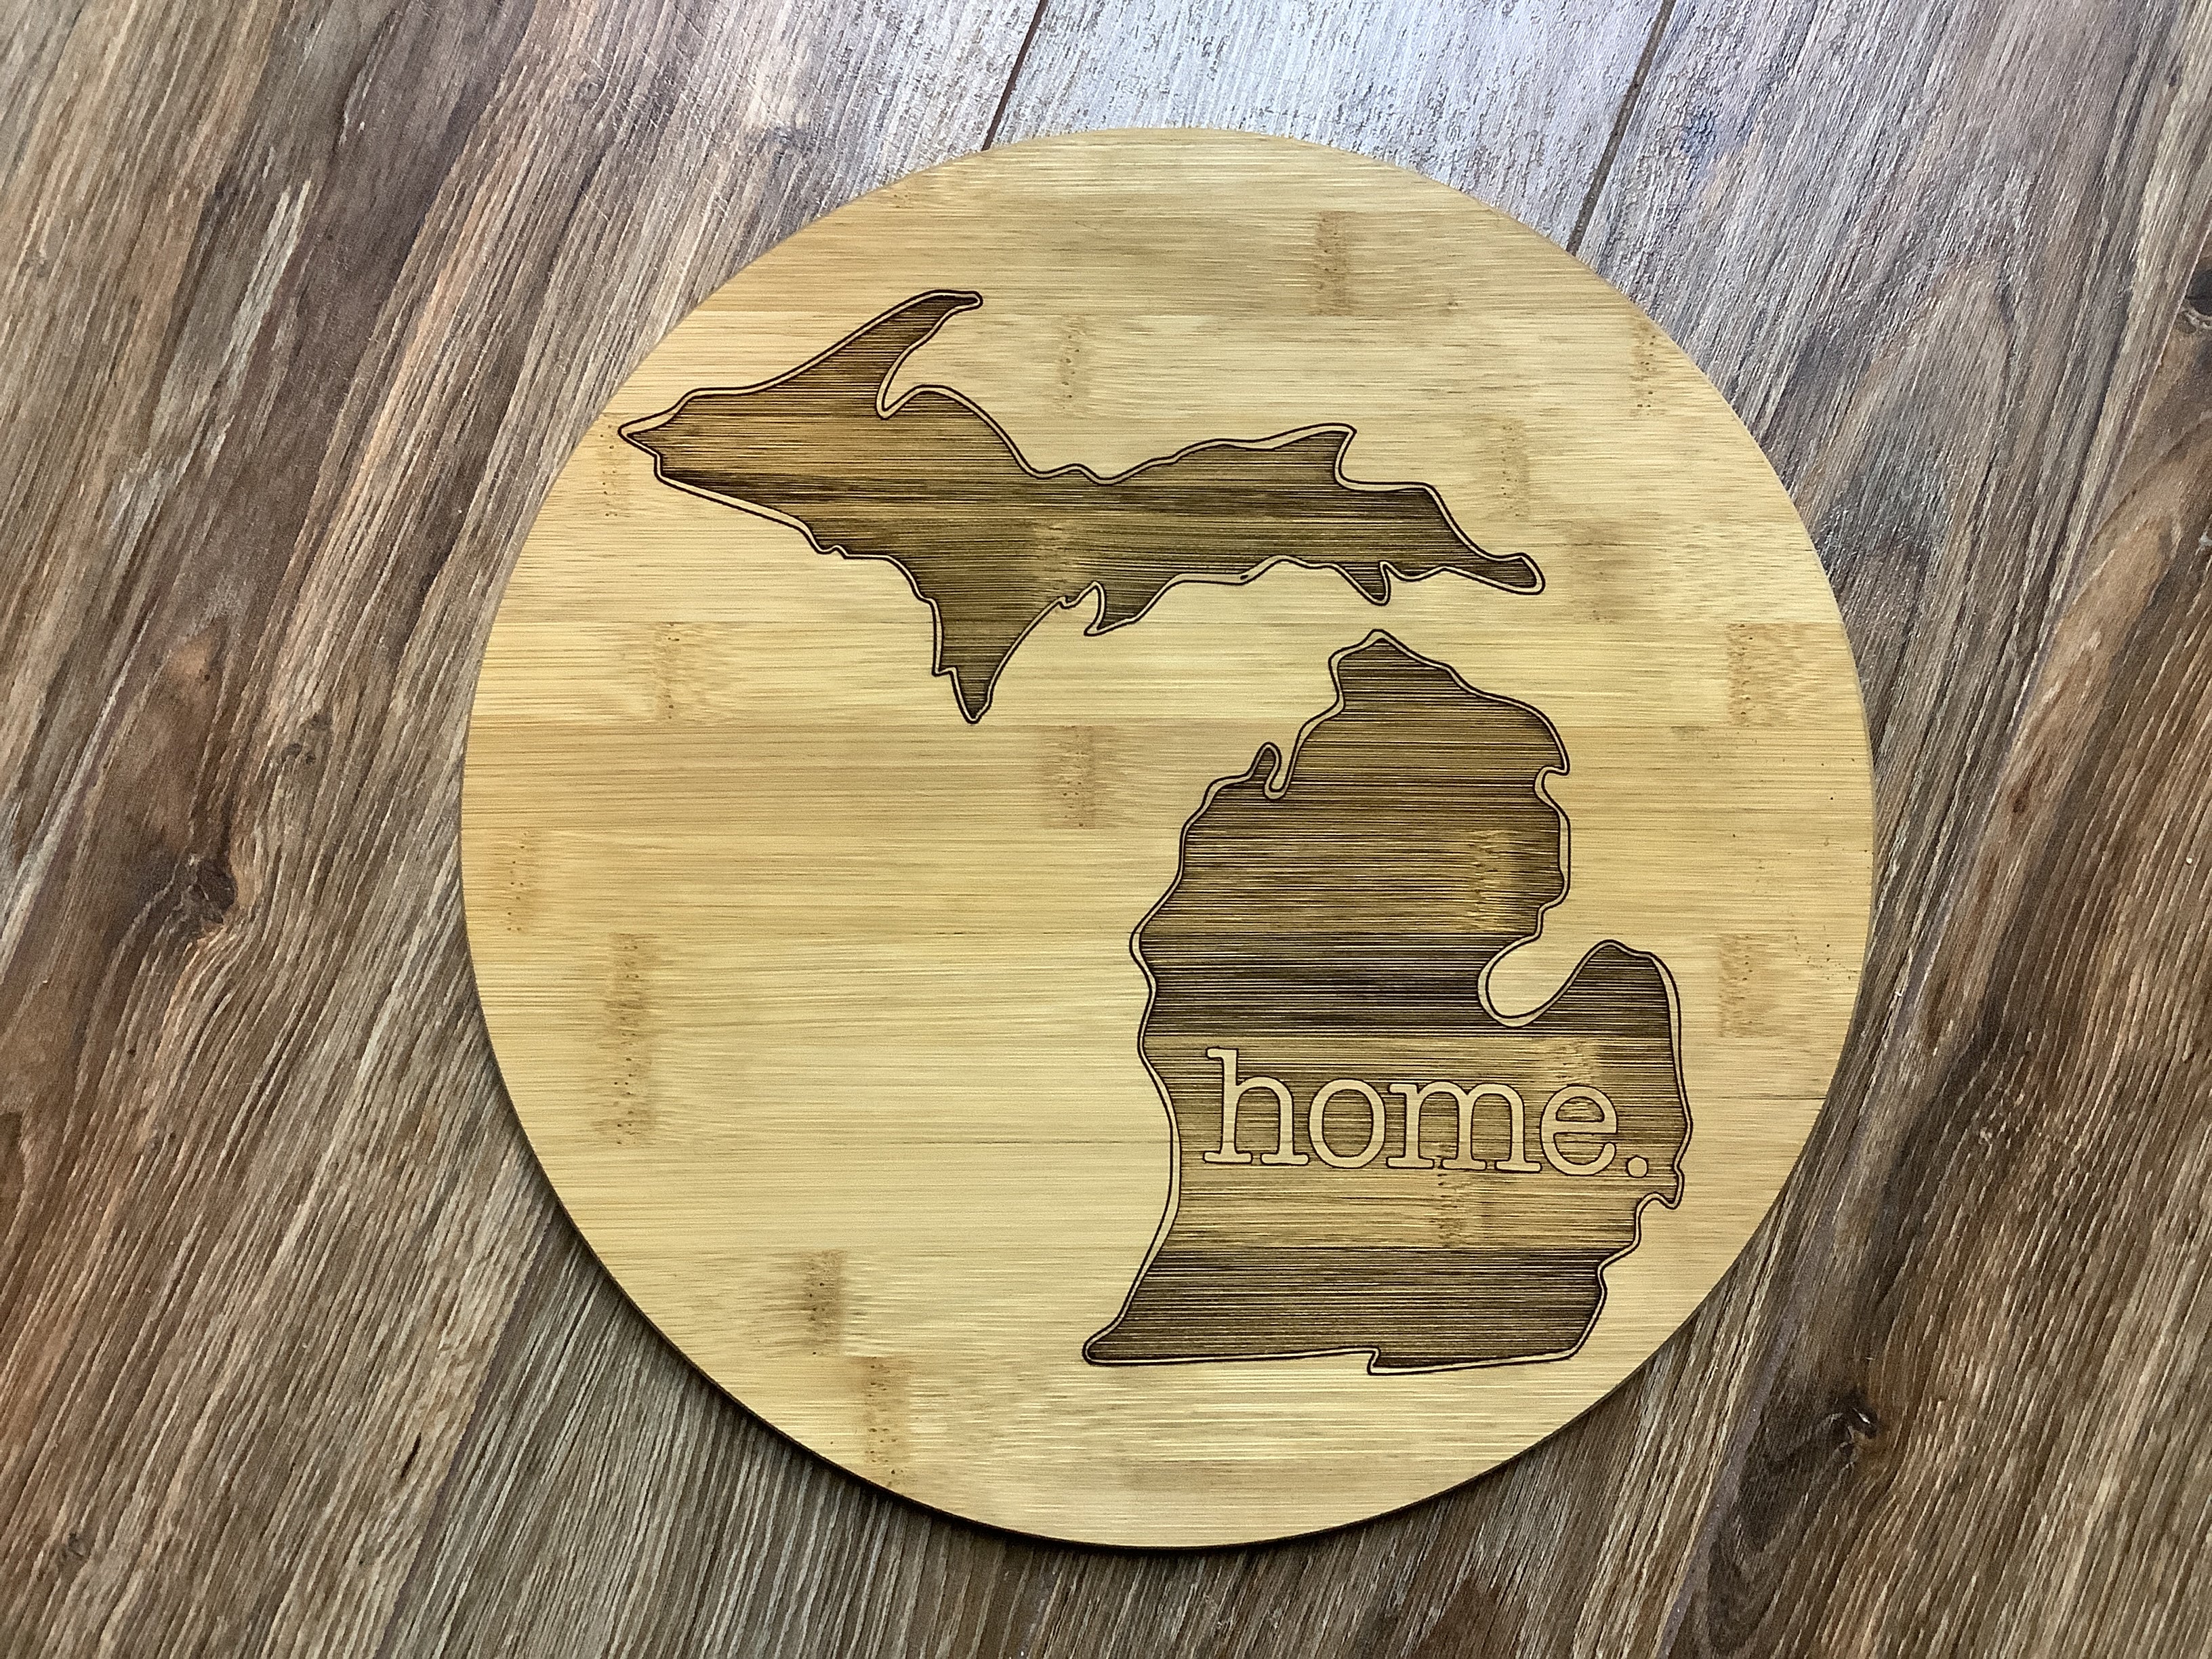 Home Michigan - Wooden Engraved - Cutting Board